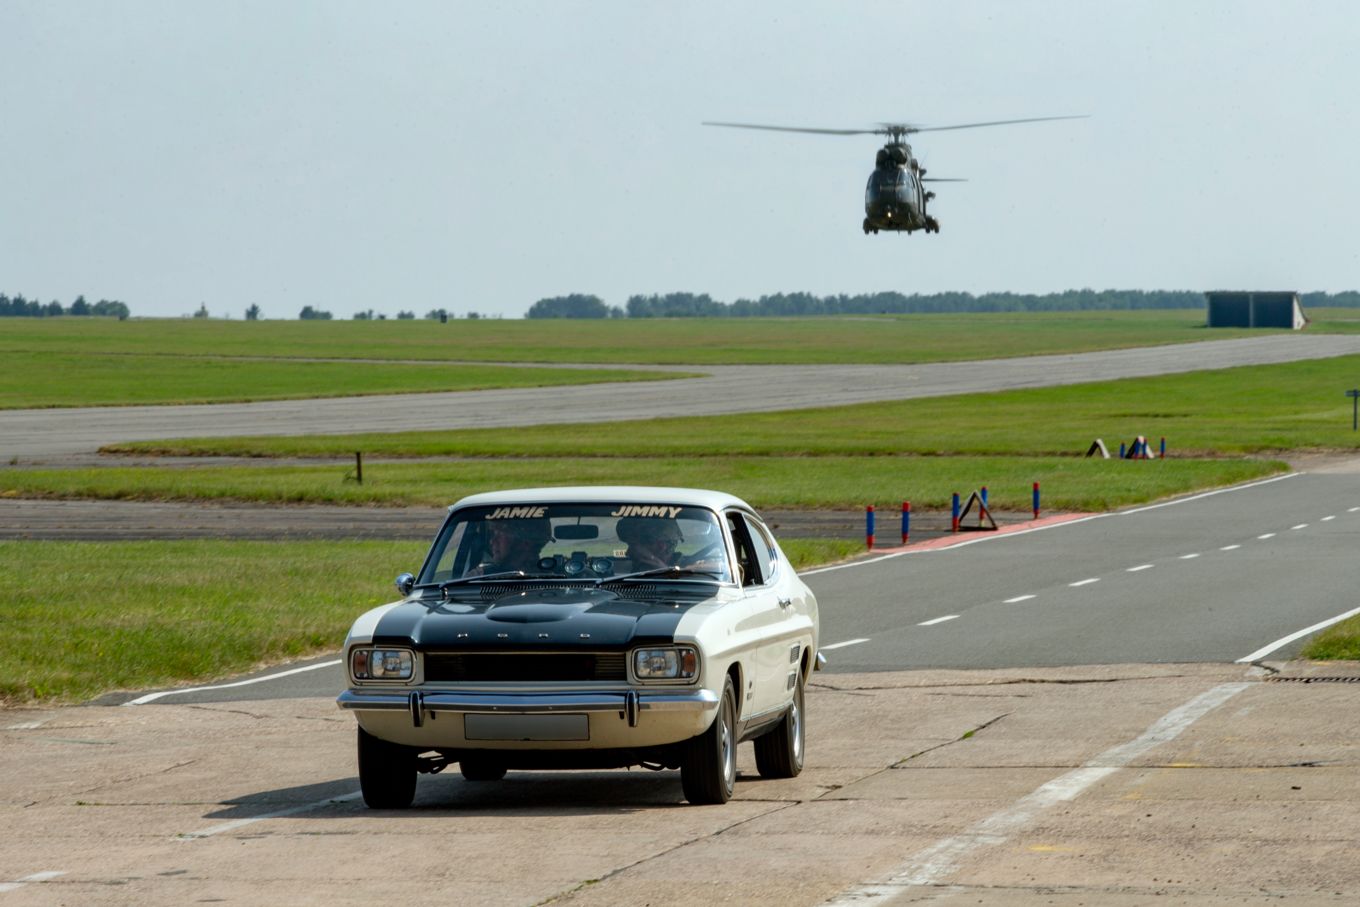 Jamie & Jimmy in the Ford Capri at RAF Wittering.